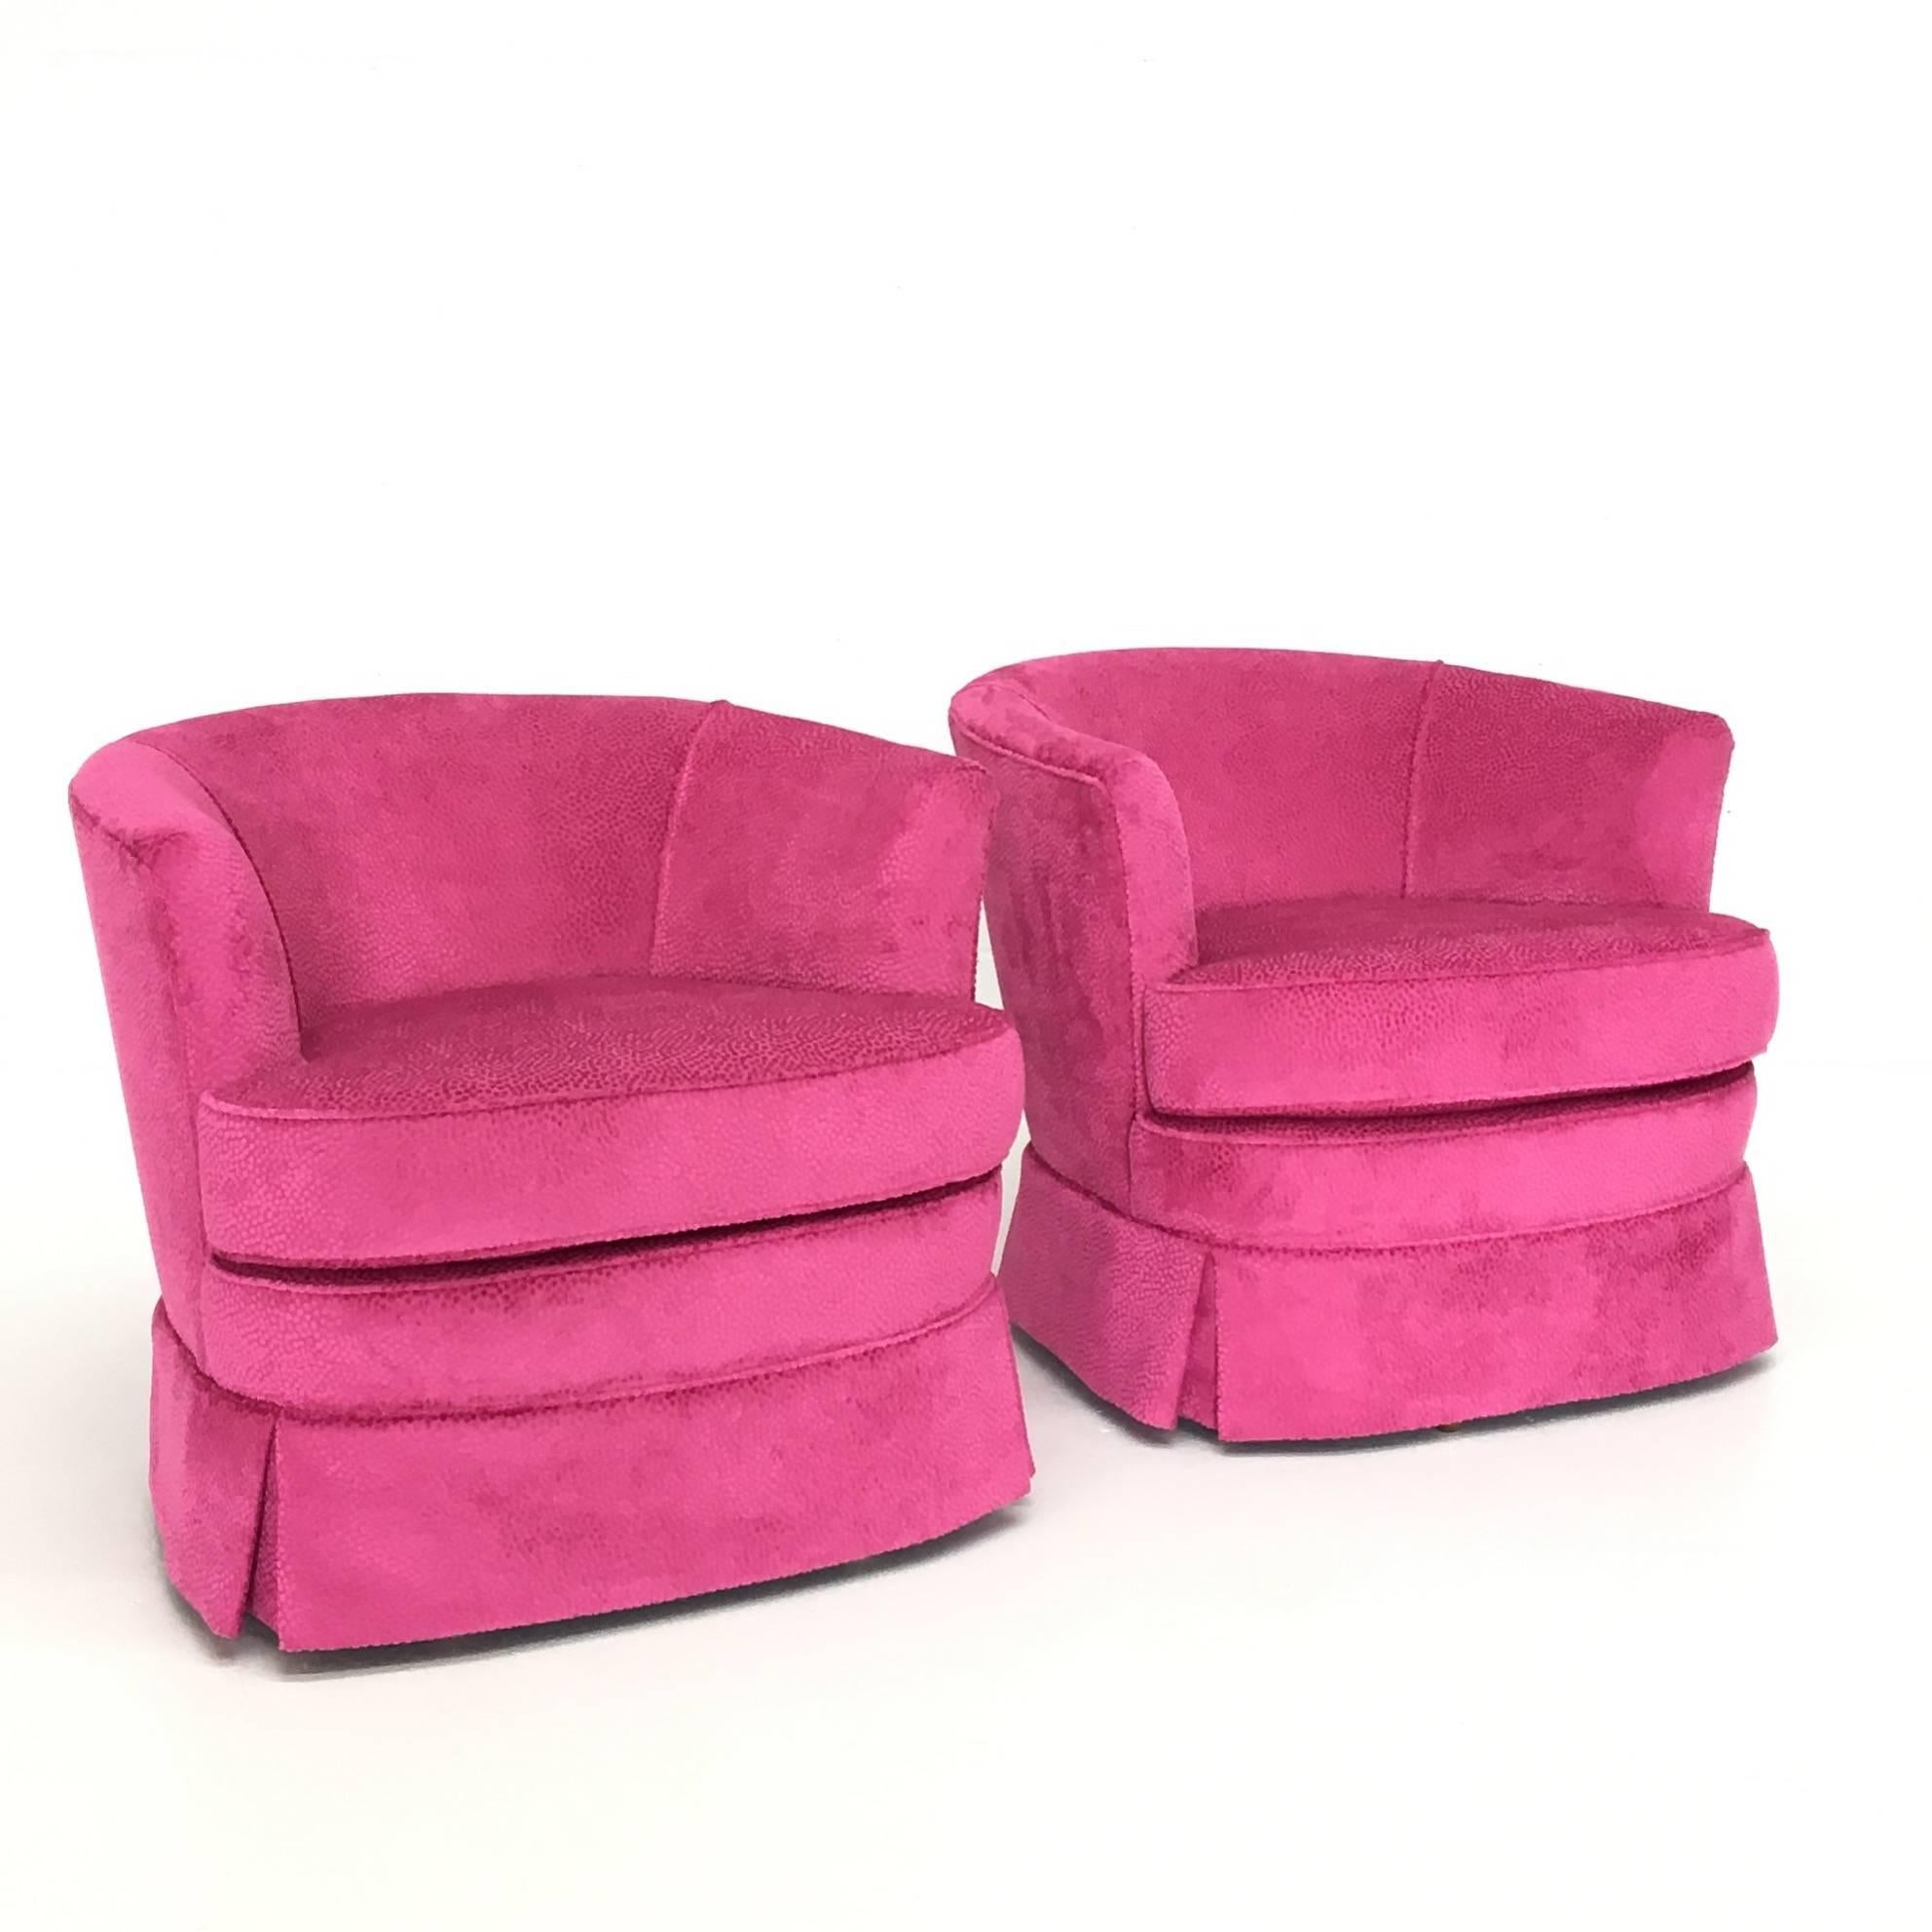 A wonderful pair of Mid-Century Modern swivel club chairs, swivelling 36 degrees with no memory. Newly upholstered with all new foam/Dacron in a pink, polka dot textured velvet. A lovely modest size wouldn't overwhelm any room.